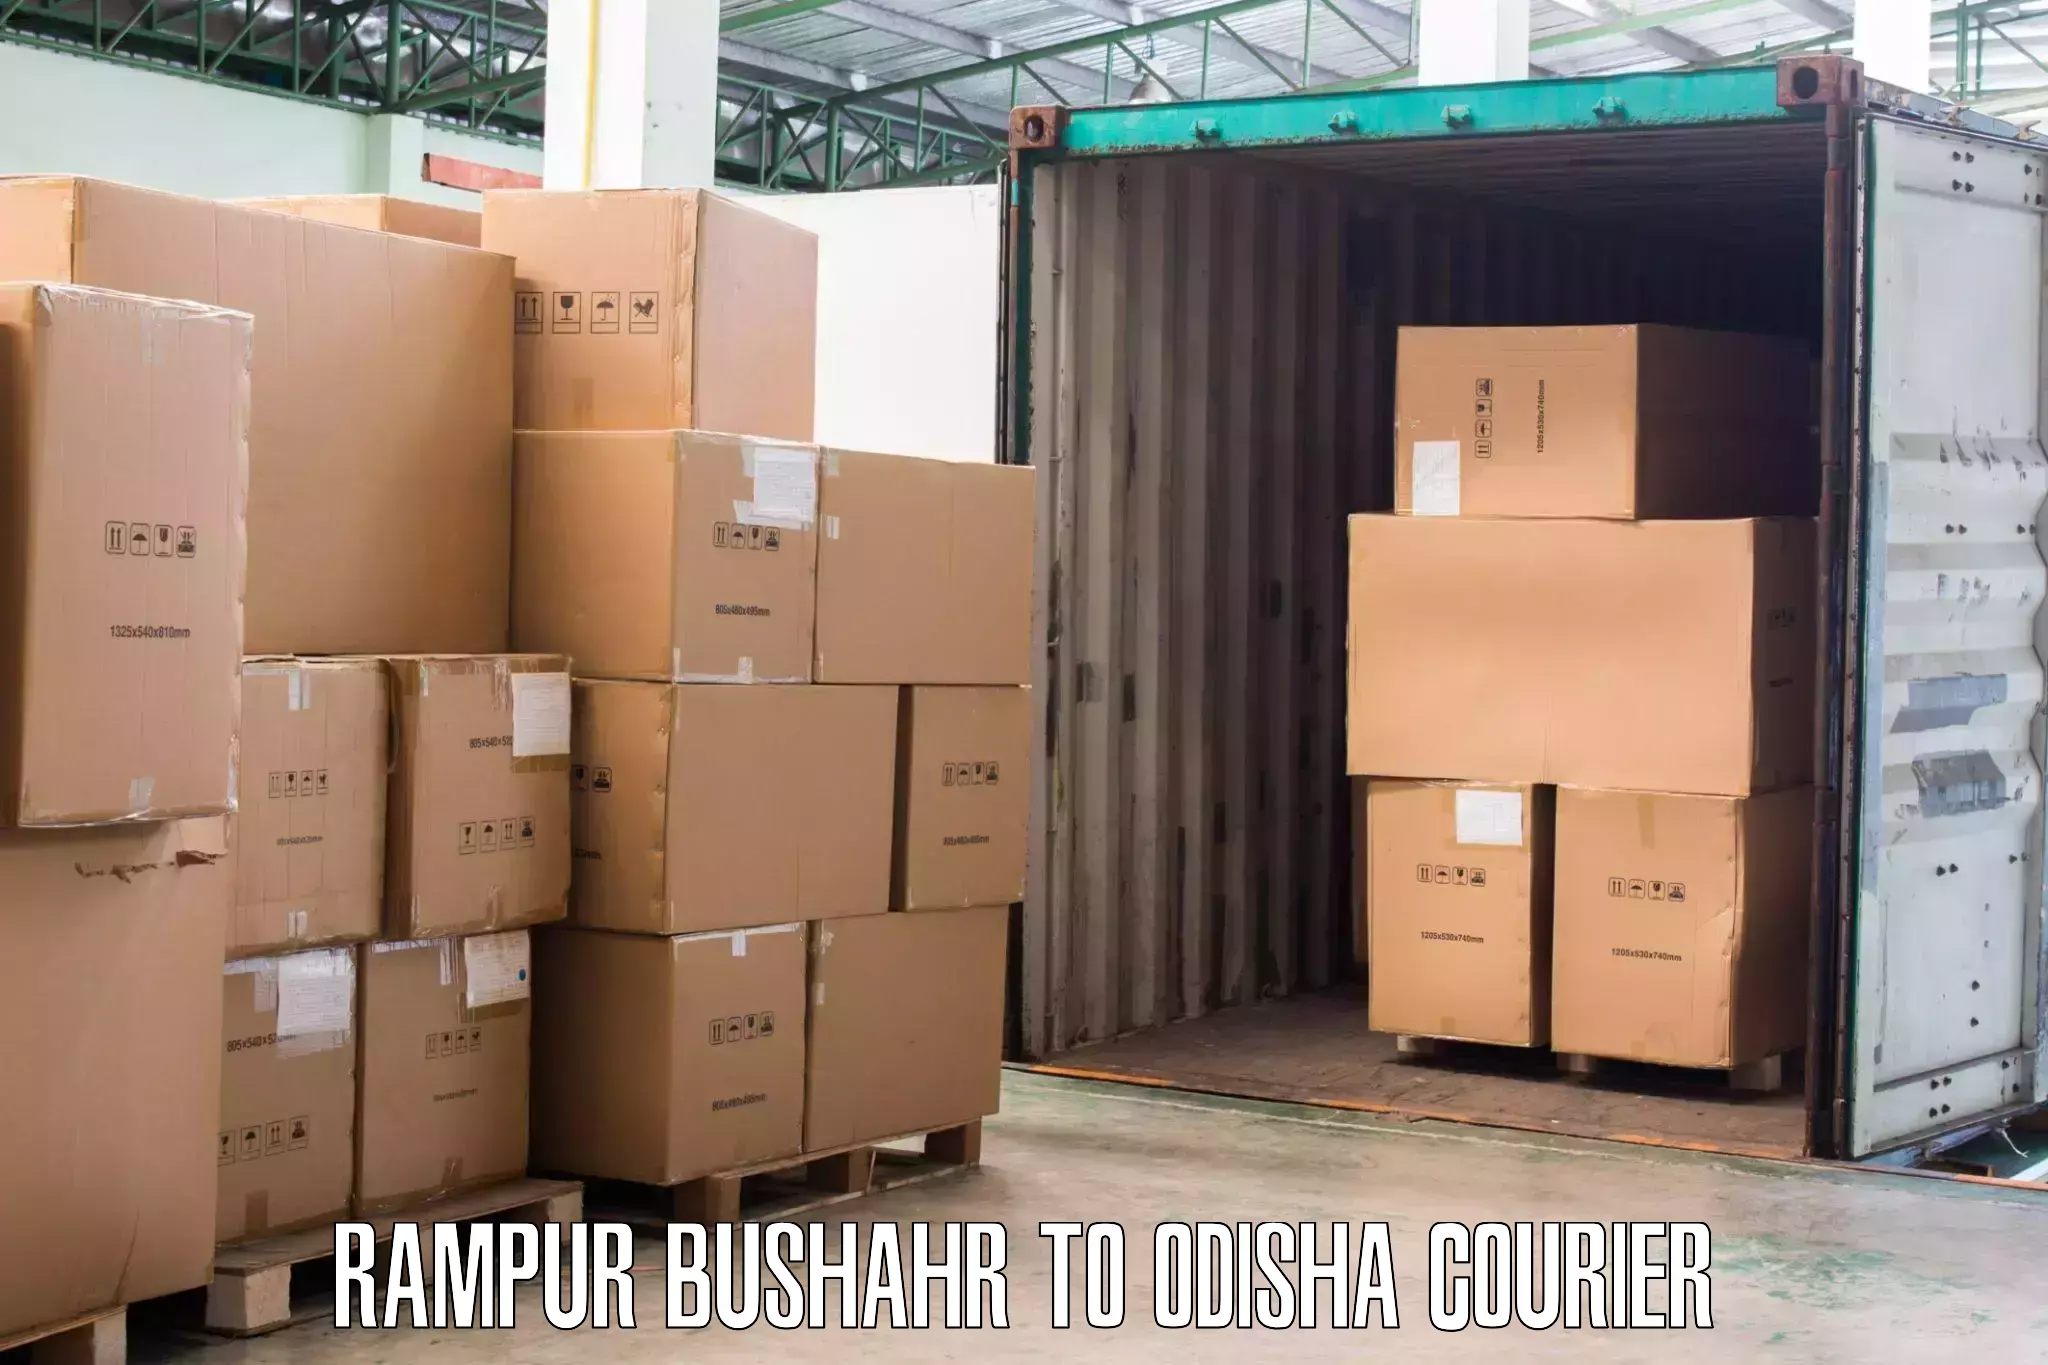 Long-distance moving services Rampur Bushahr to Ghatgaon